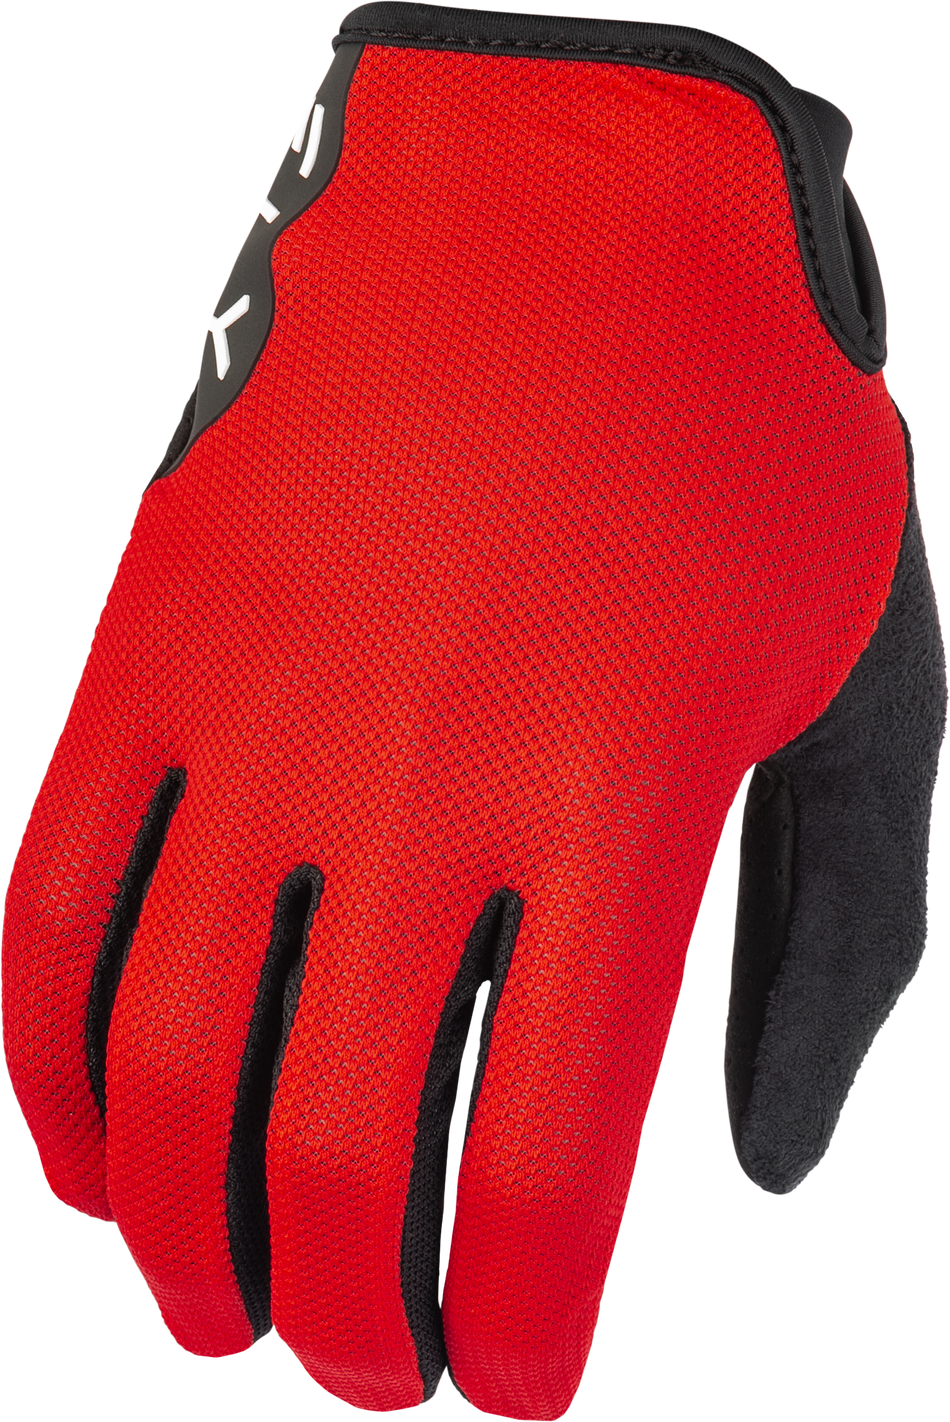 FLY RACING Mesh Gloves Red 3x 375-3373X